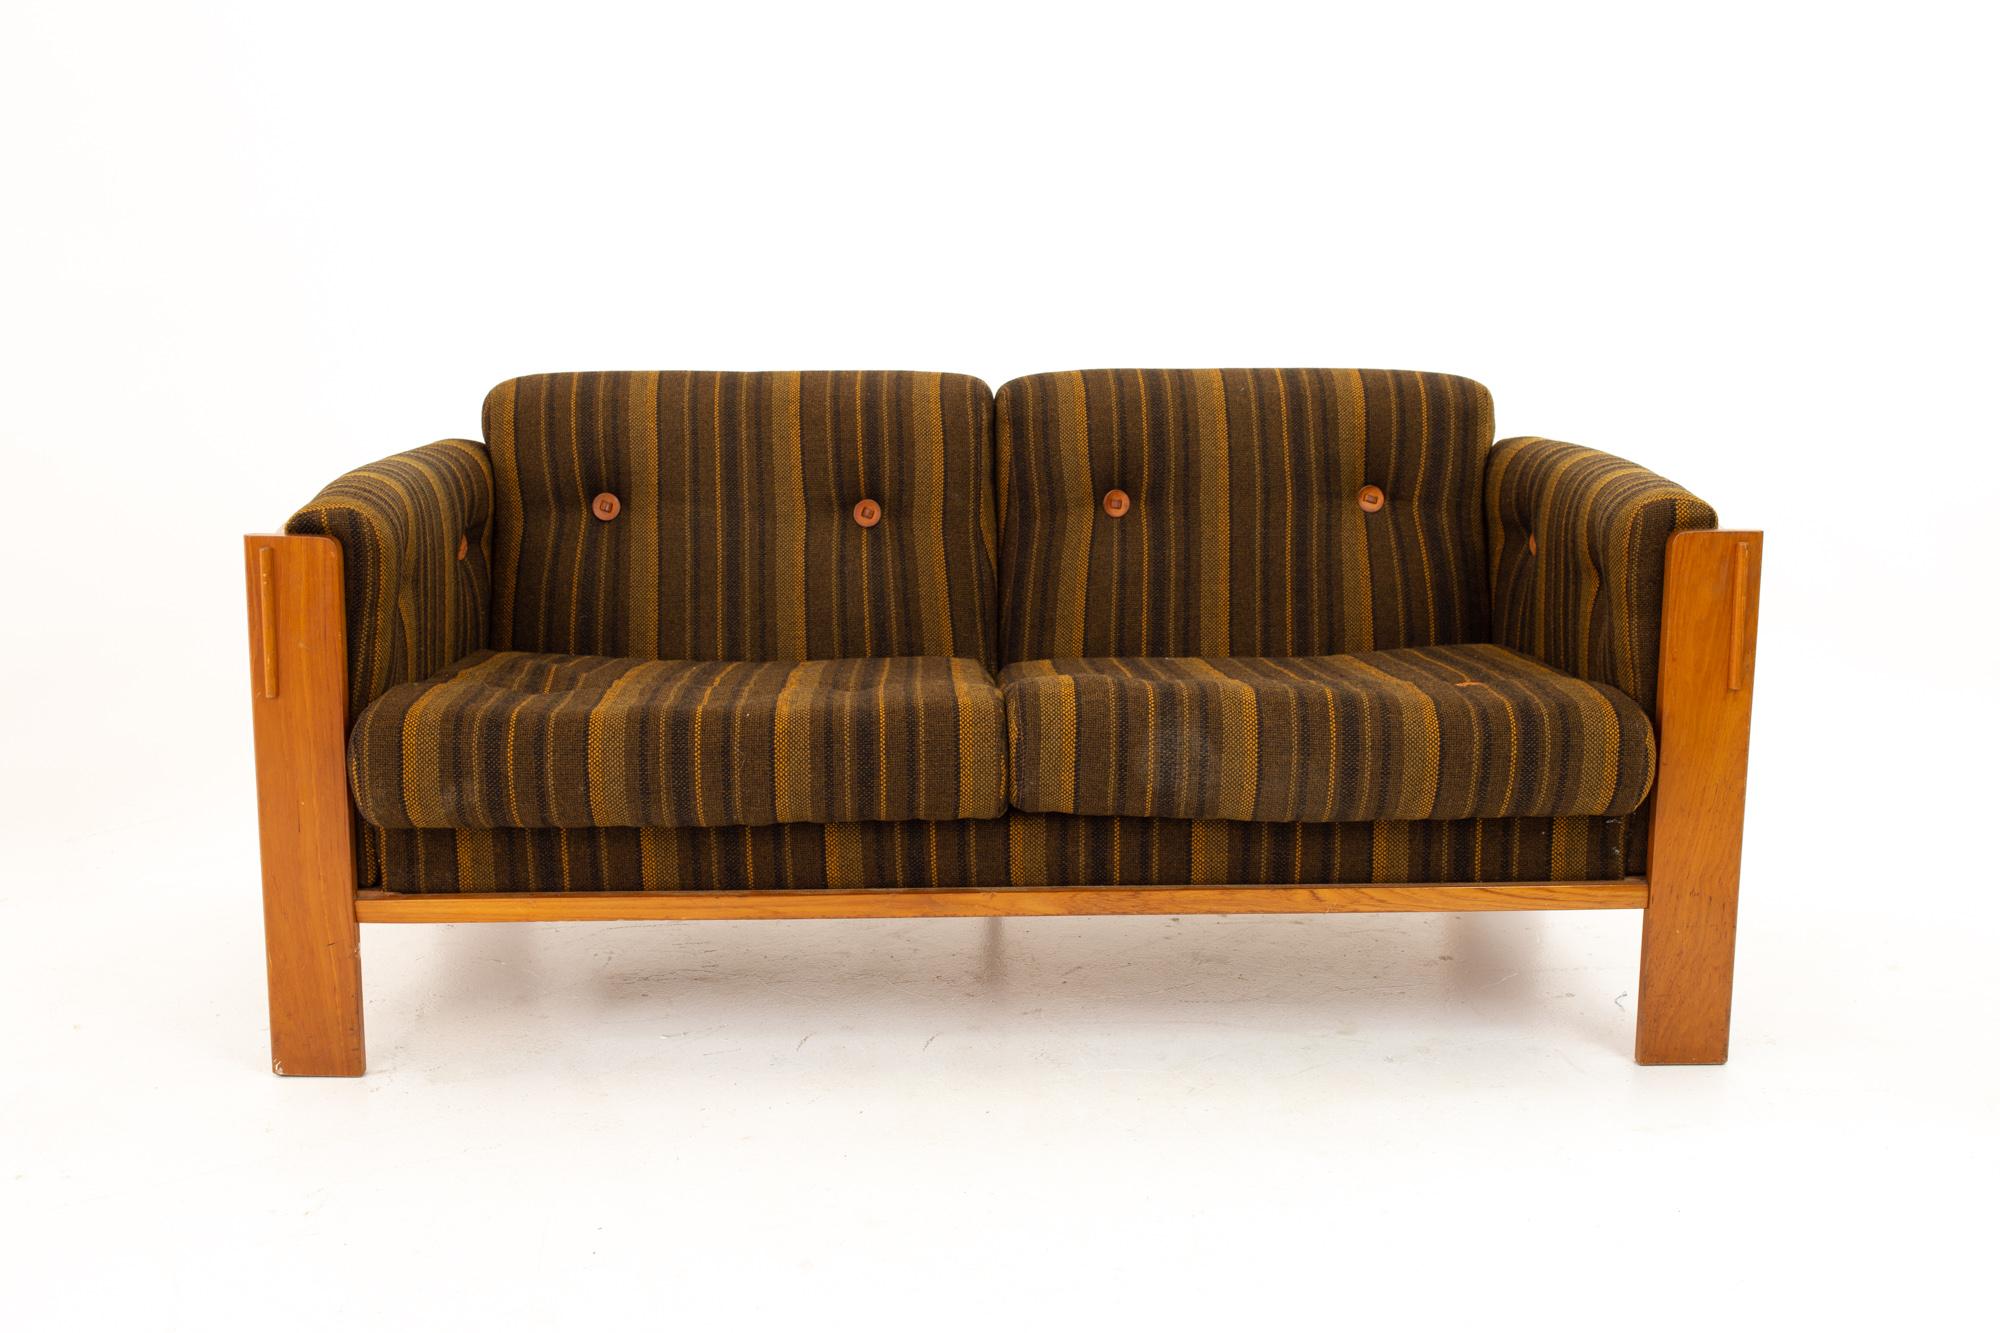 Jydsk Mobelvaerk Mid Century teak loveseat
Loveseat measures: 60 wide x 32 deep x 26 high, with a seat height of 15 inches

This piece is available in what we call restored vintage condition. Upon purchase it is thoroughly cleaned and minor repairs